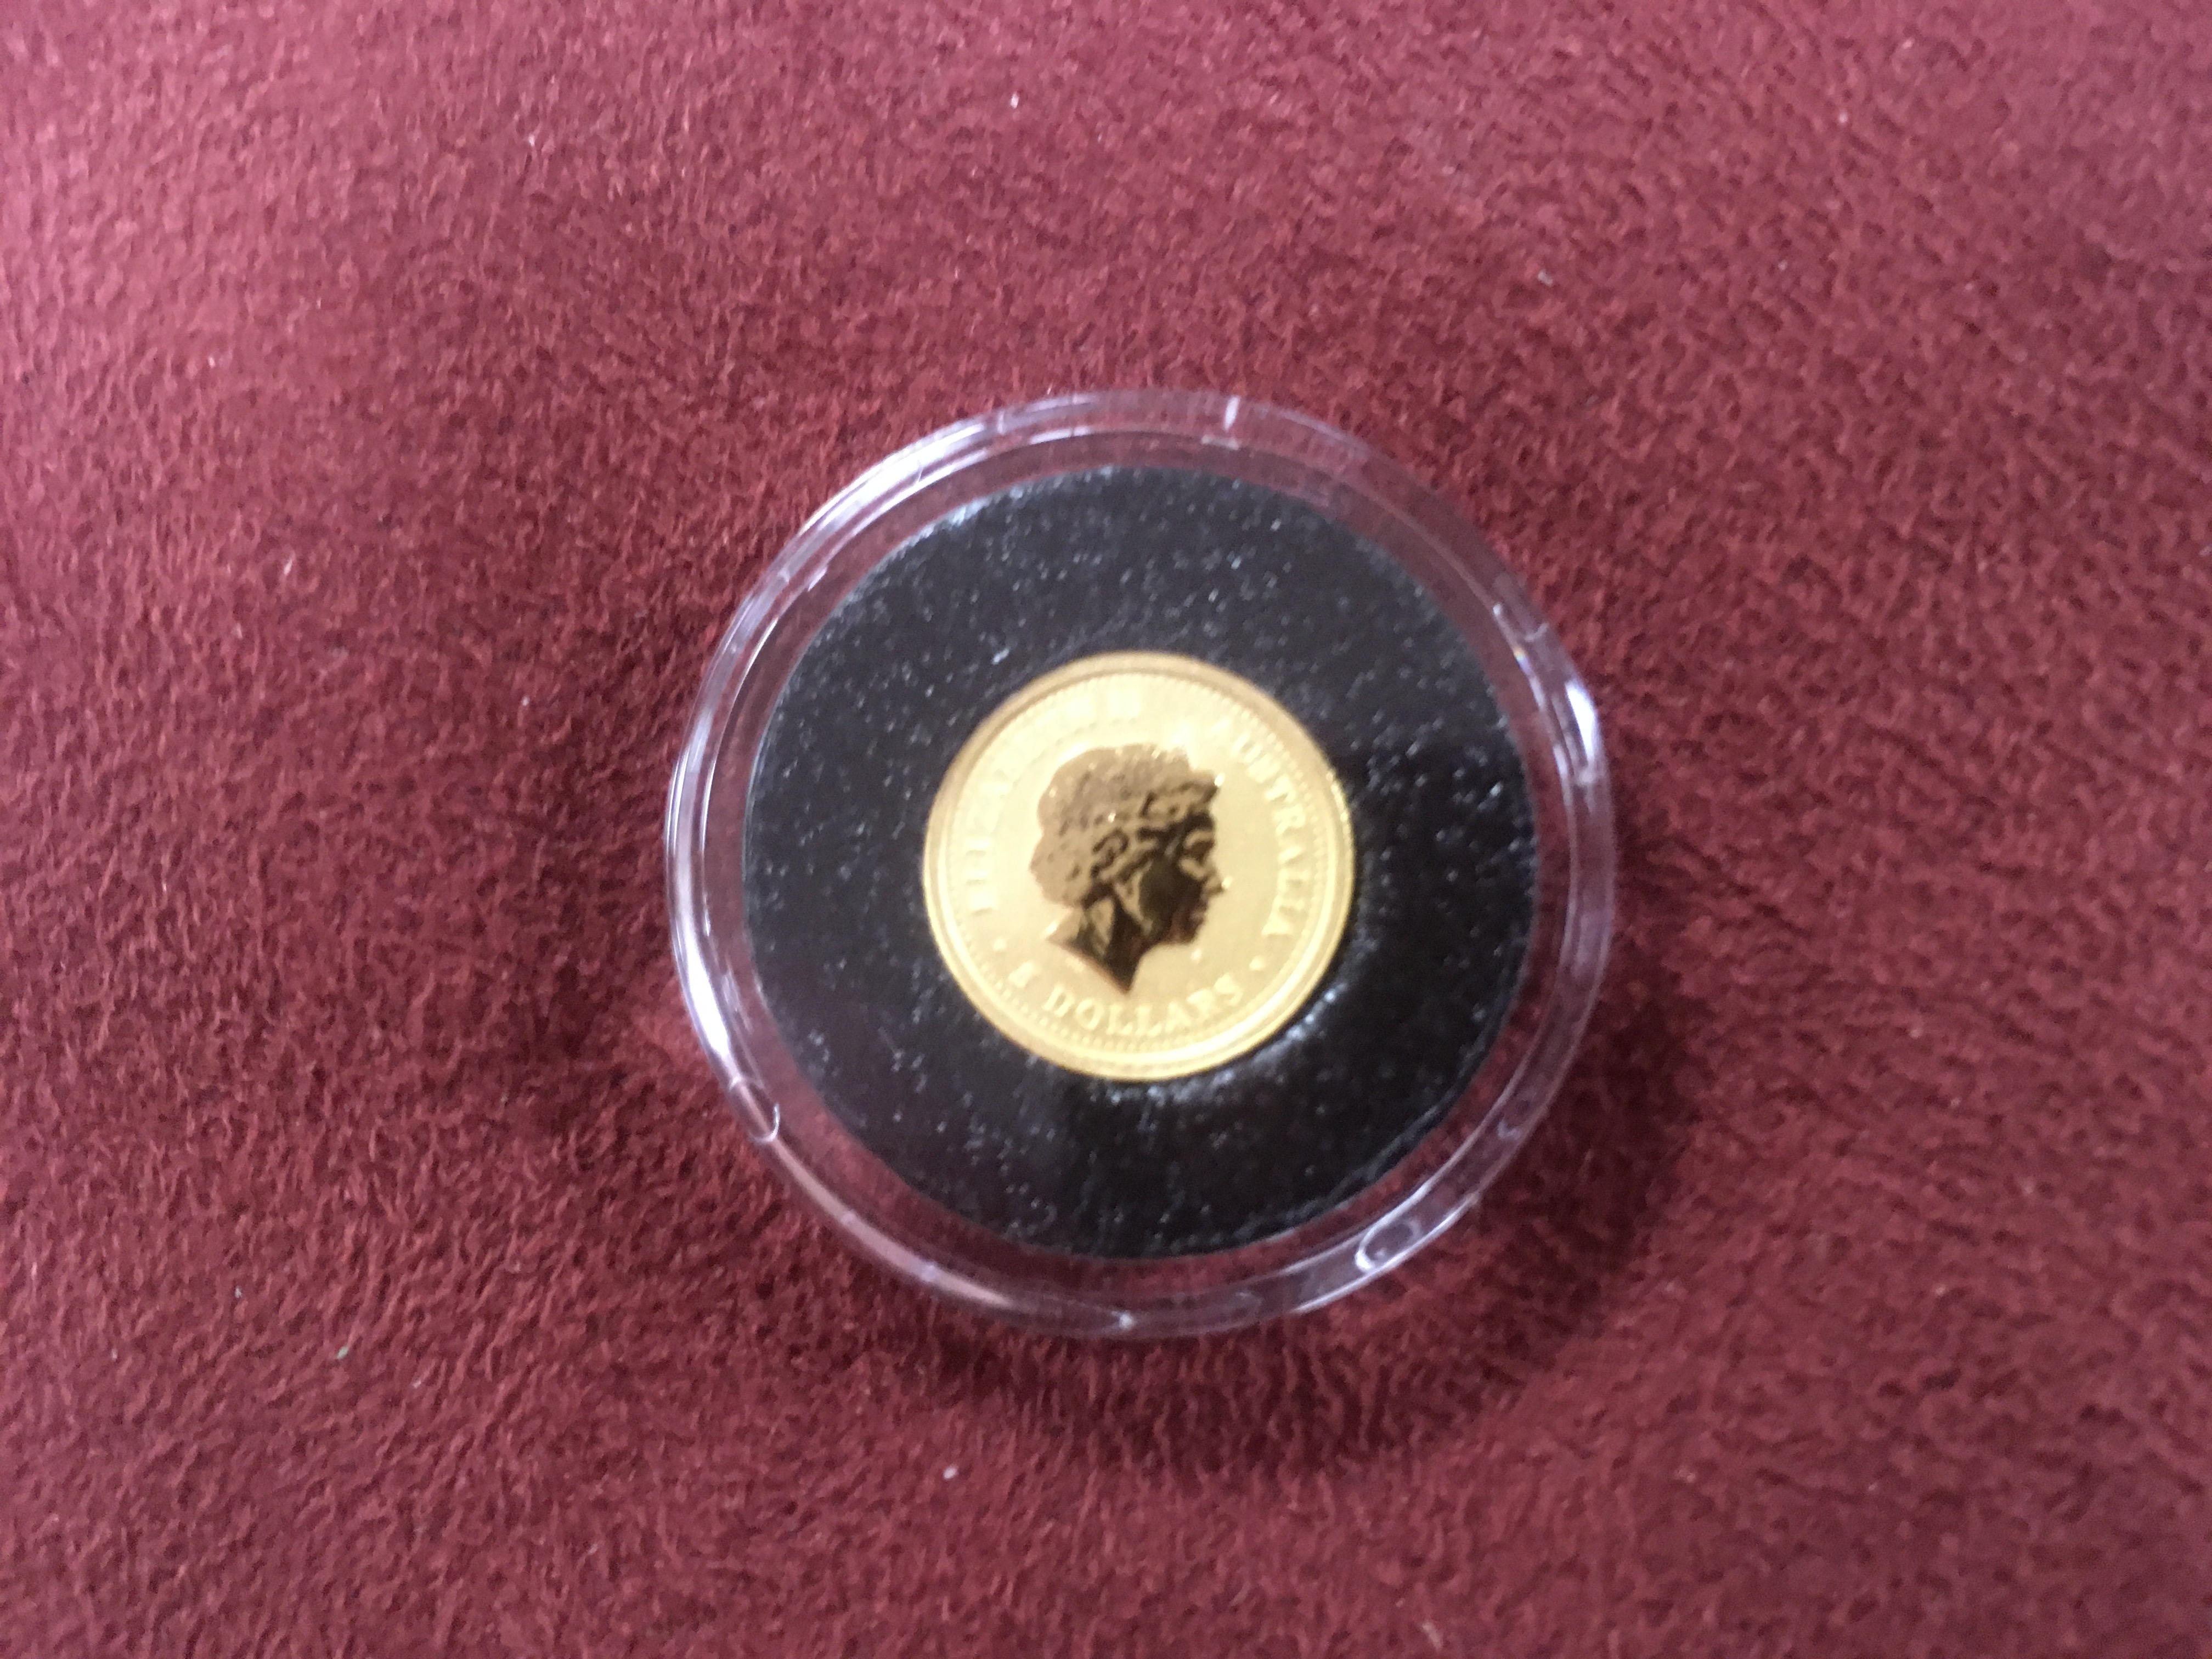 GOLD COINS: AUSTRALIA 2007 NUGGET FIVE DOLLAR 1/20oz IN PLASTIC CAPSULE WITH WESTMINSTER - Image 4 of 4